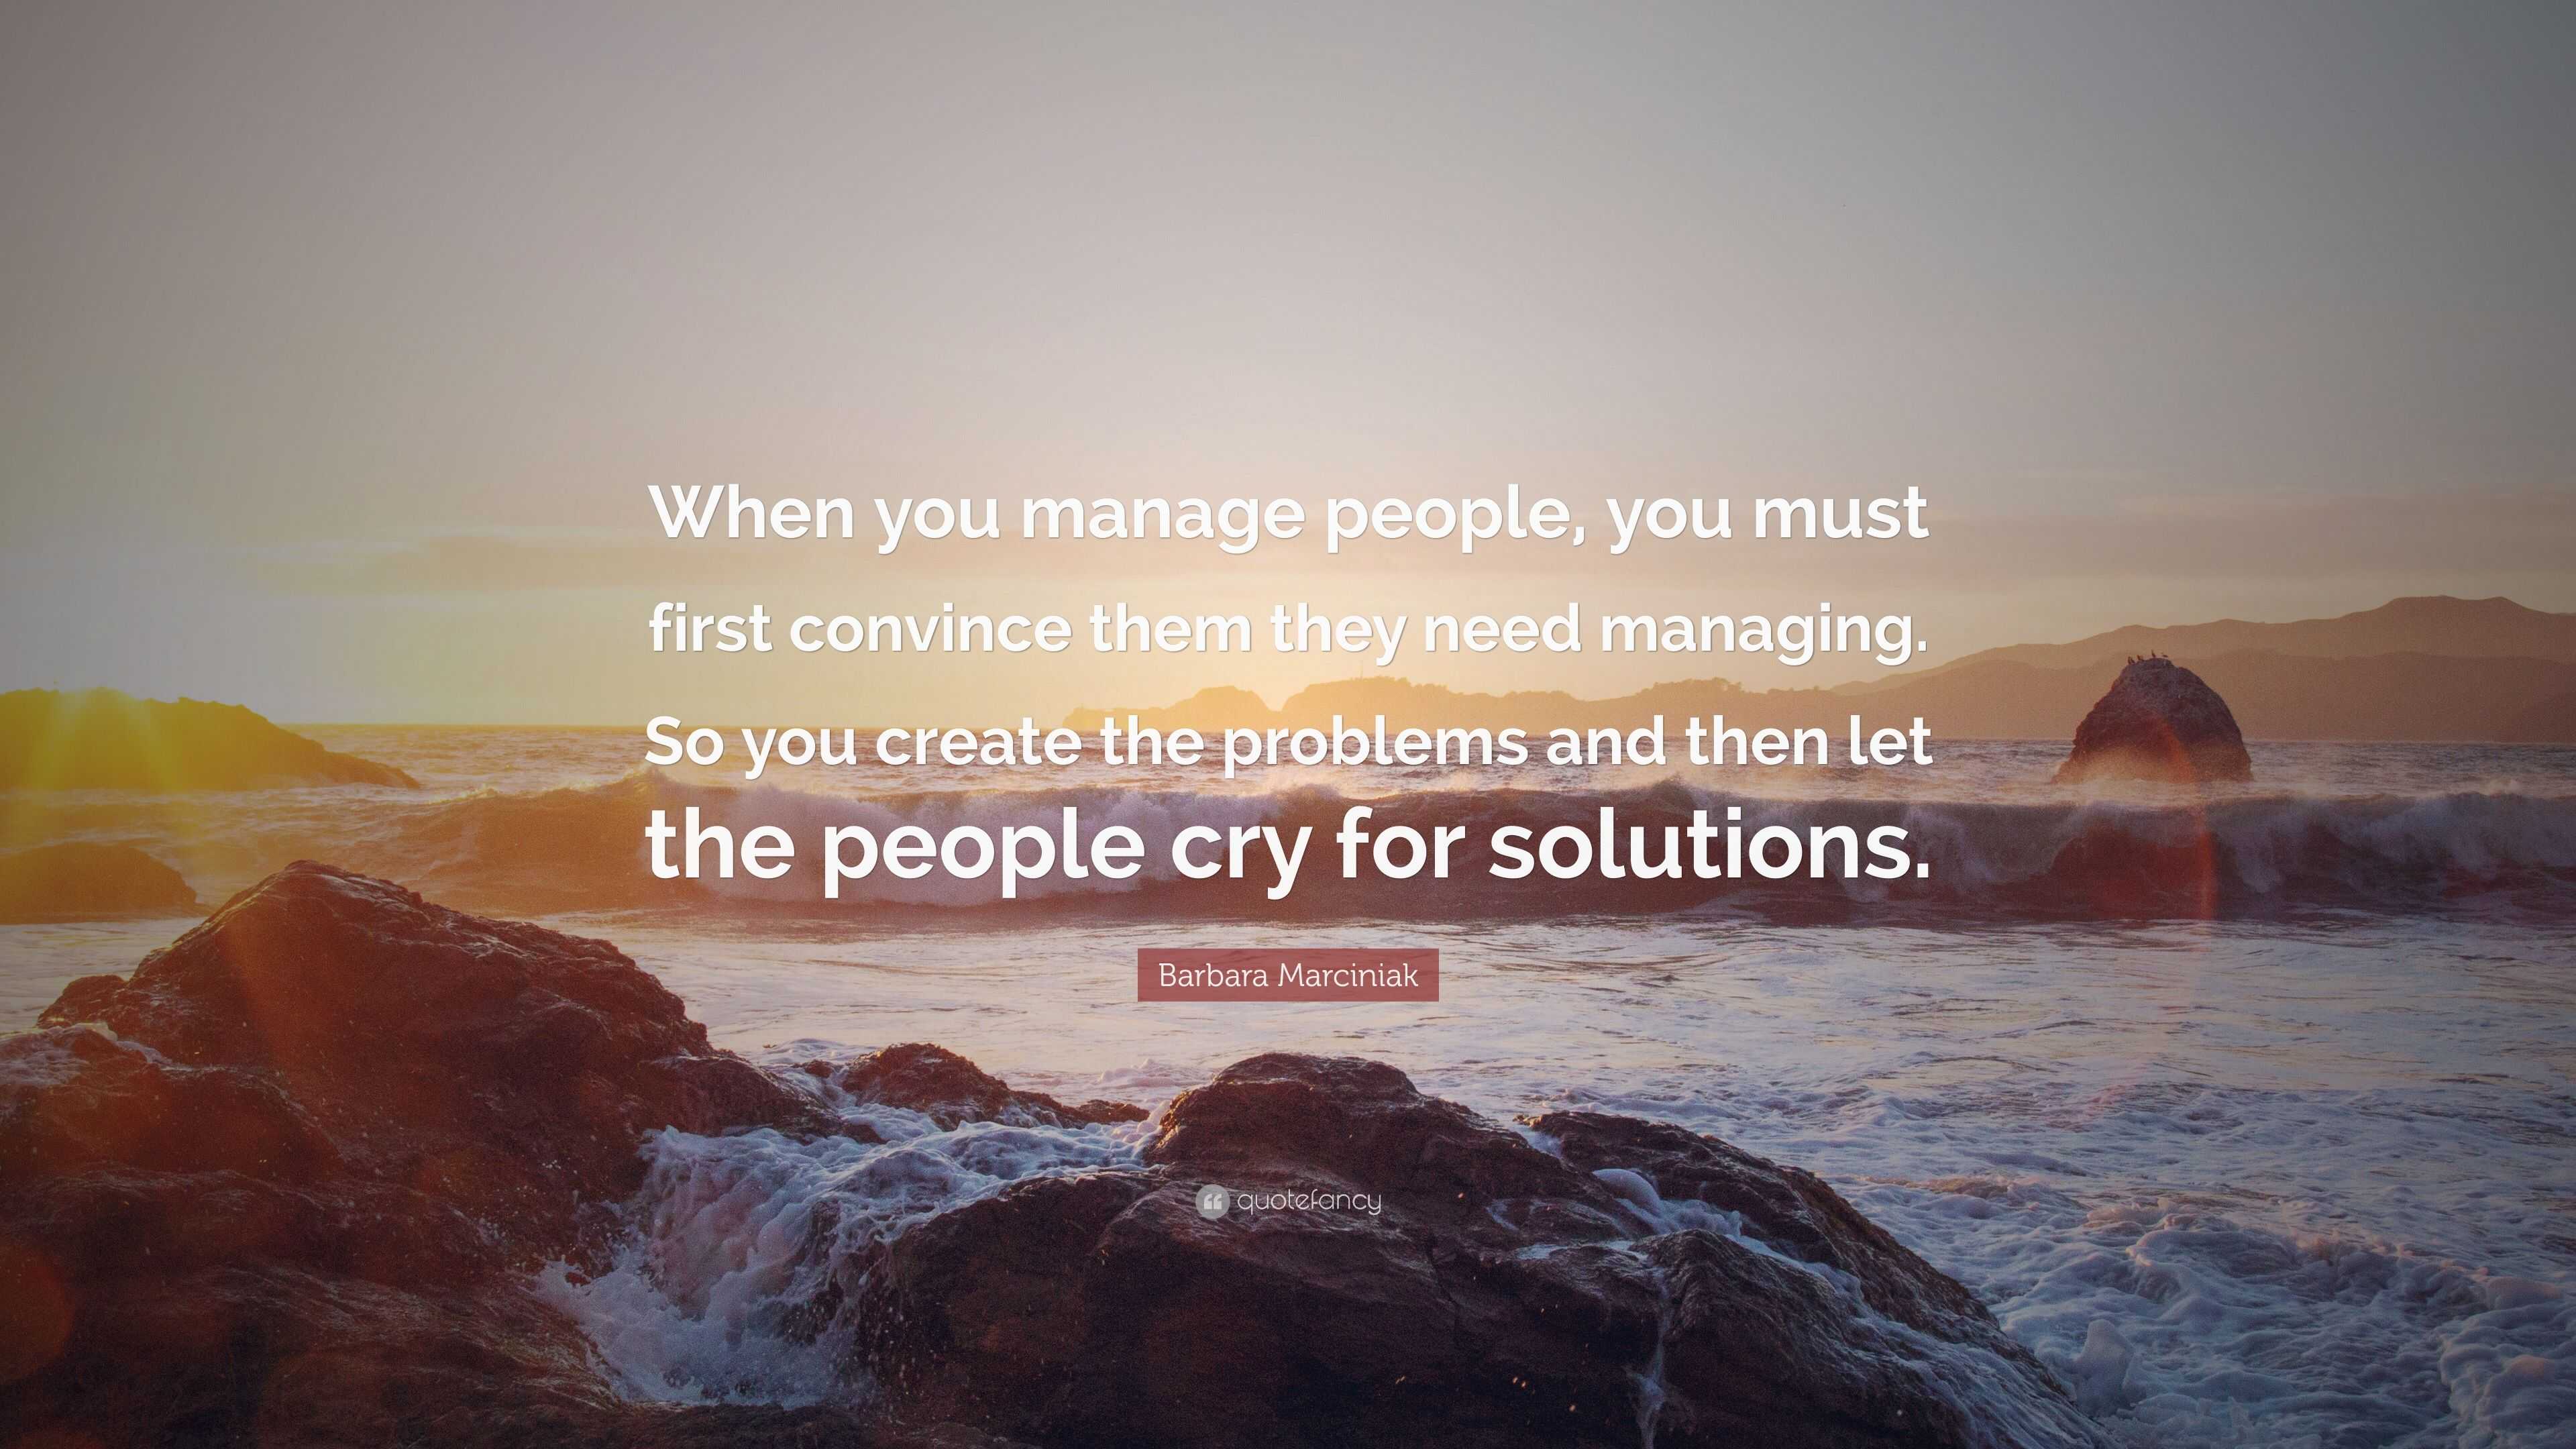 Barbara Marciniak Quote: “When you manage people, you must first